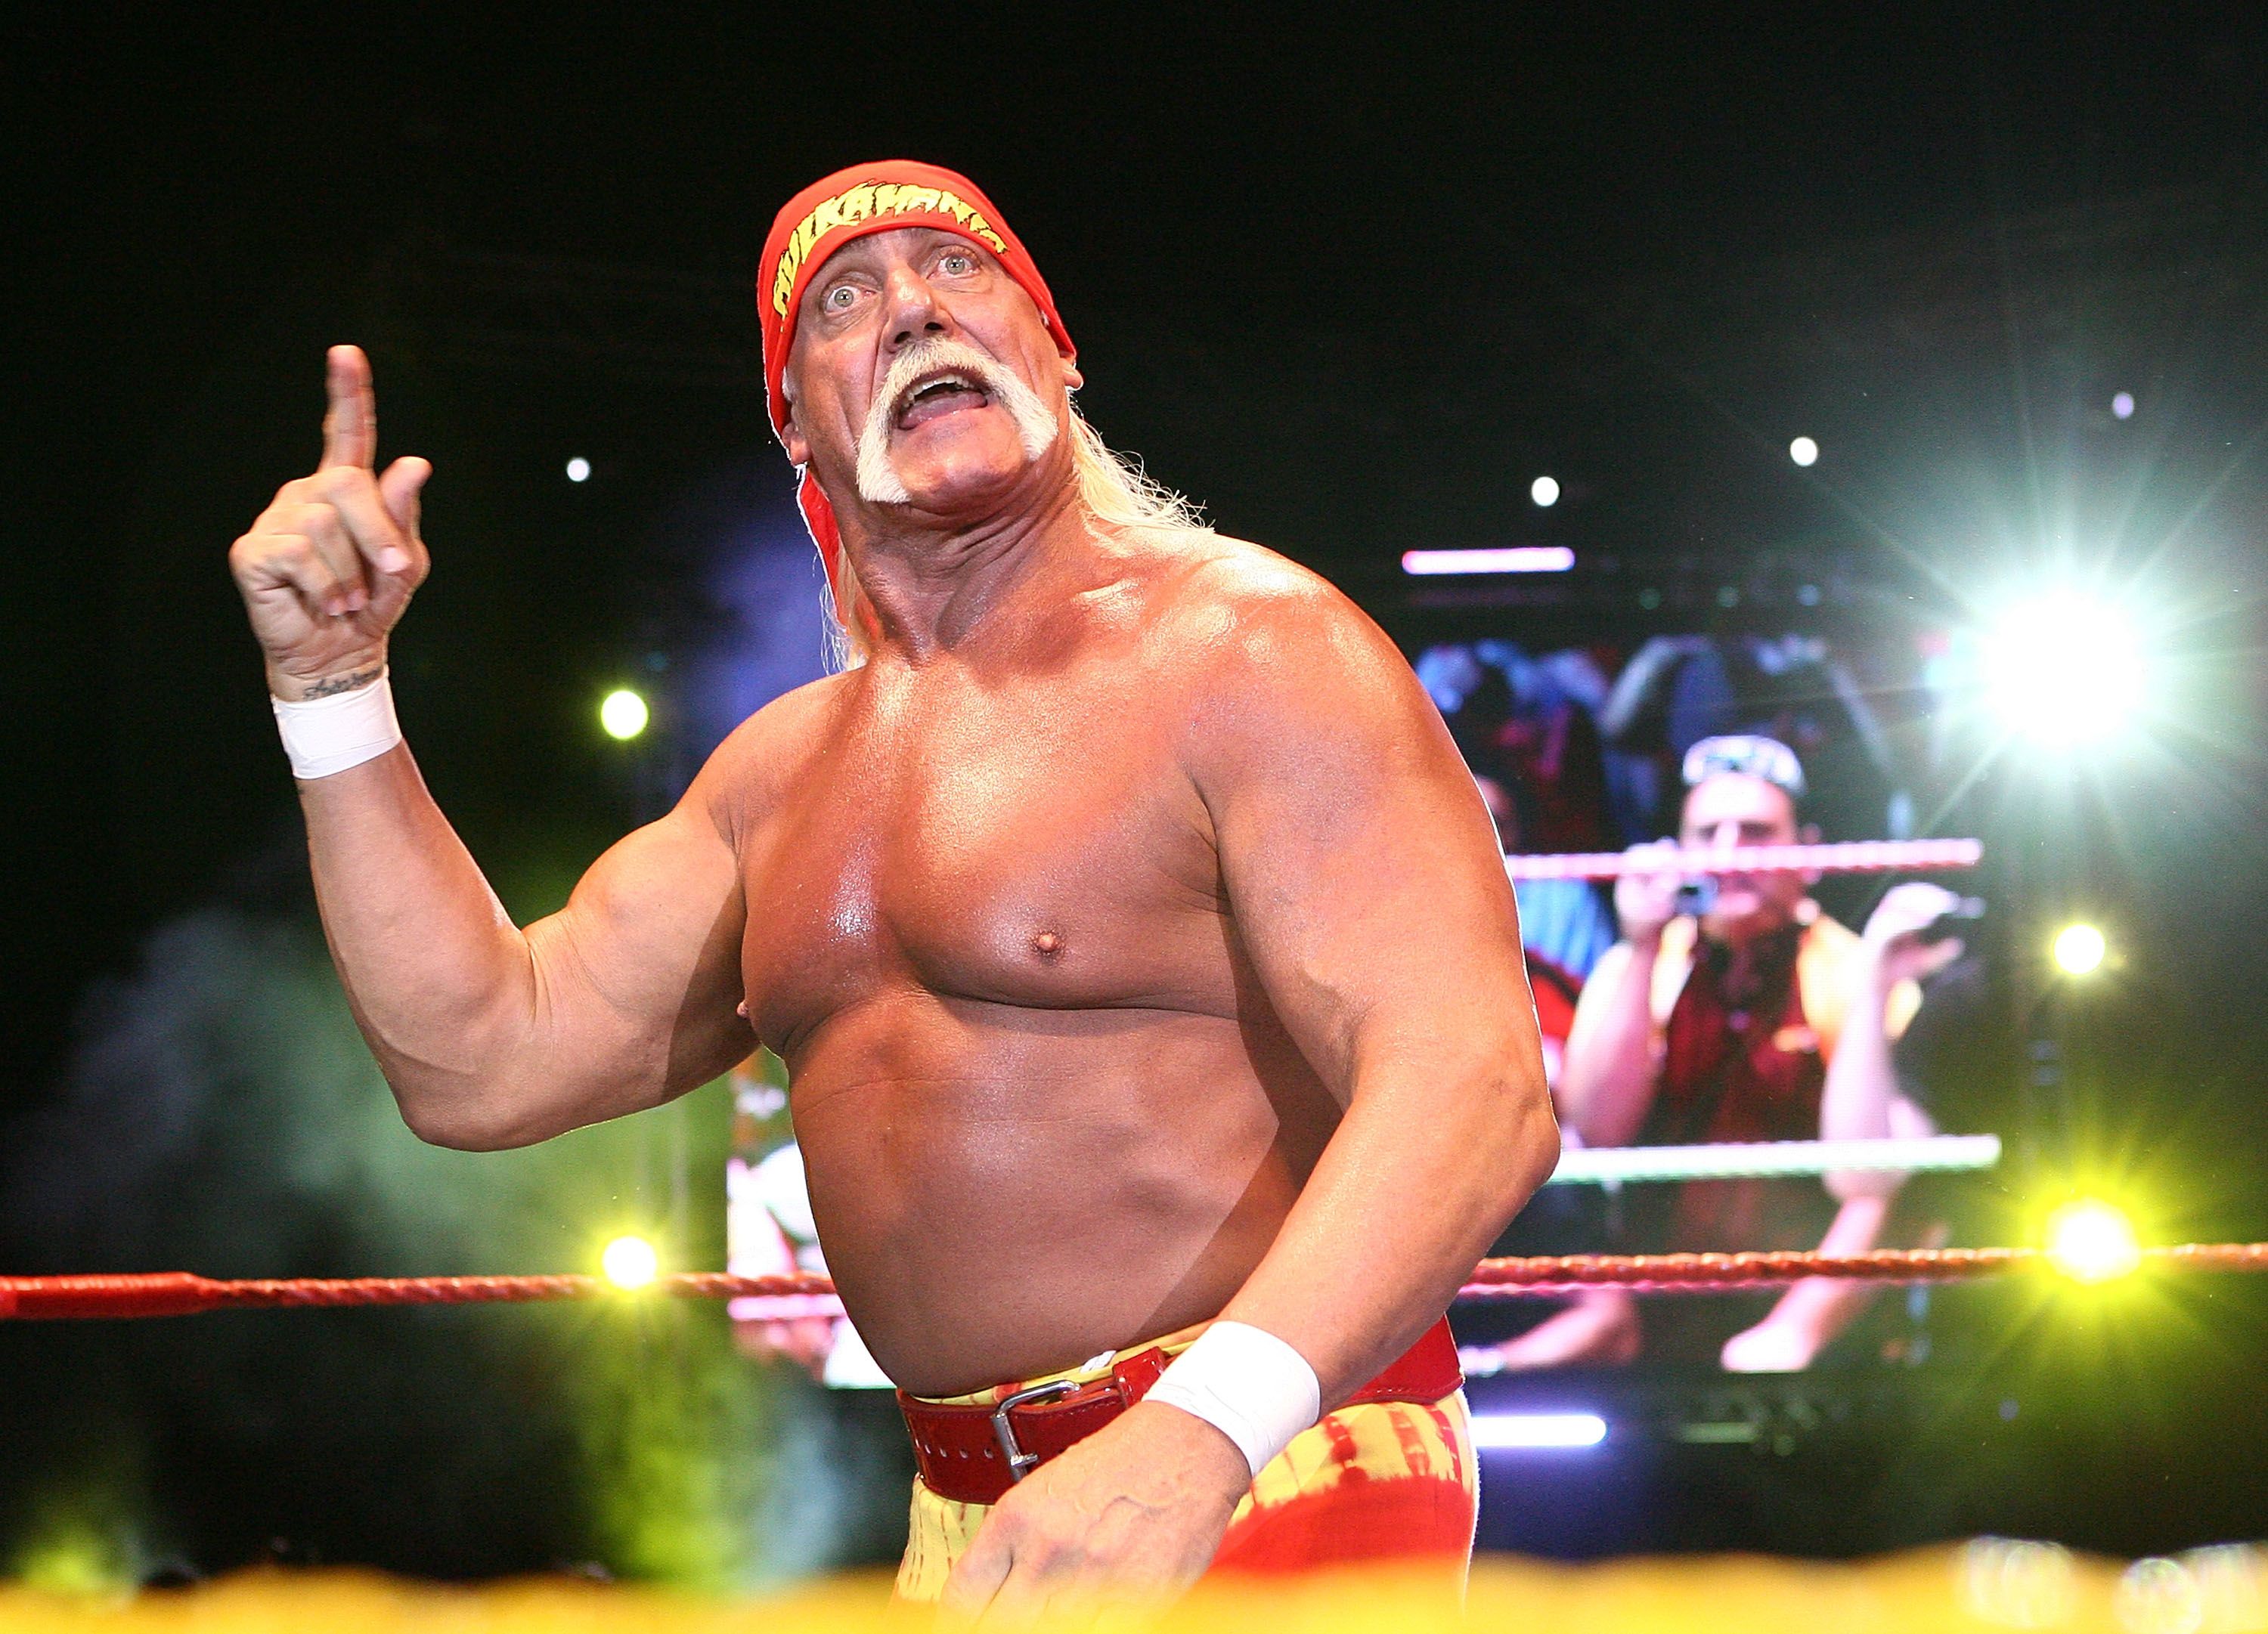 Hulk Hogan Claims He Is Down To His '9th Grade Weight' In New Photo